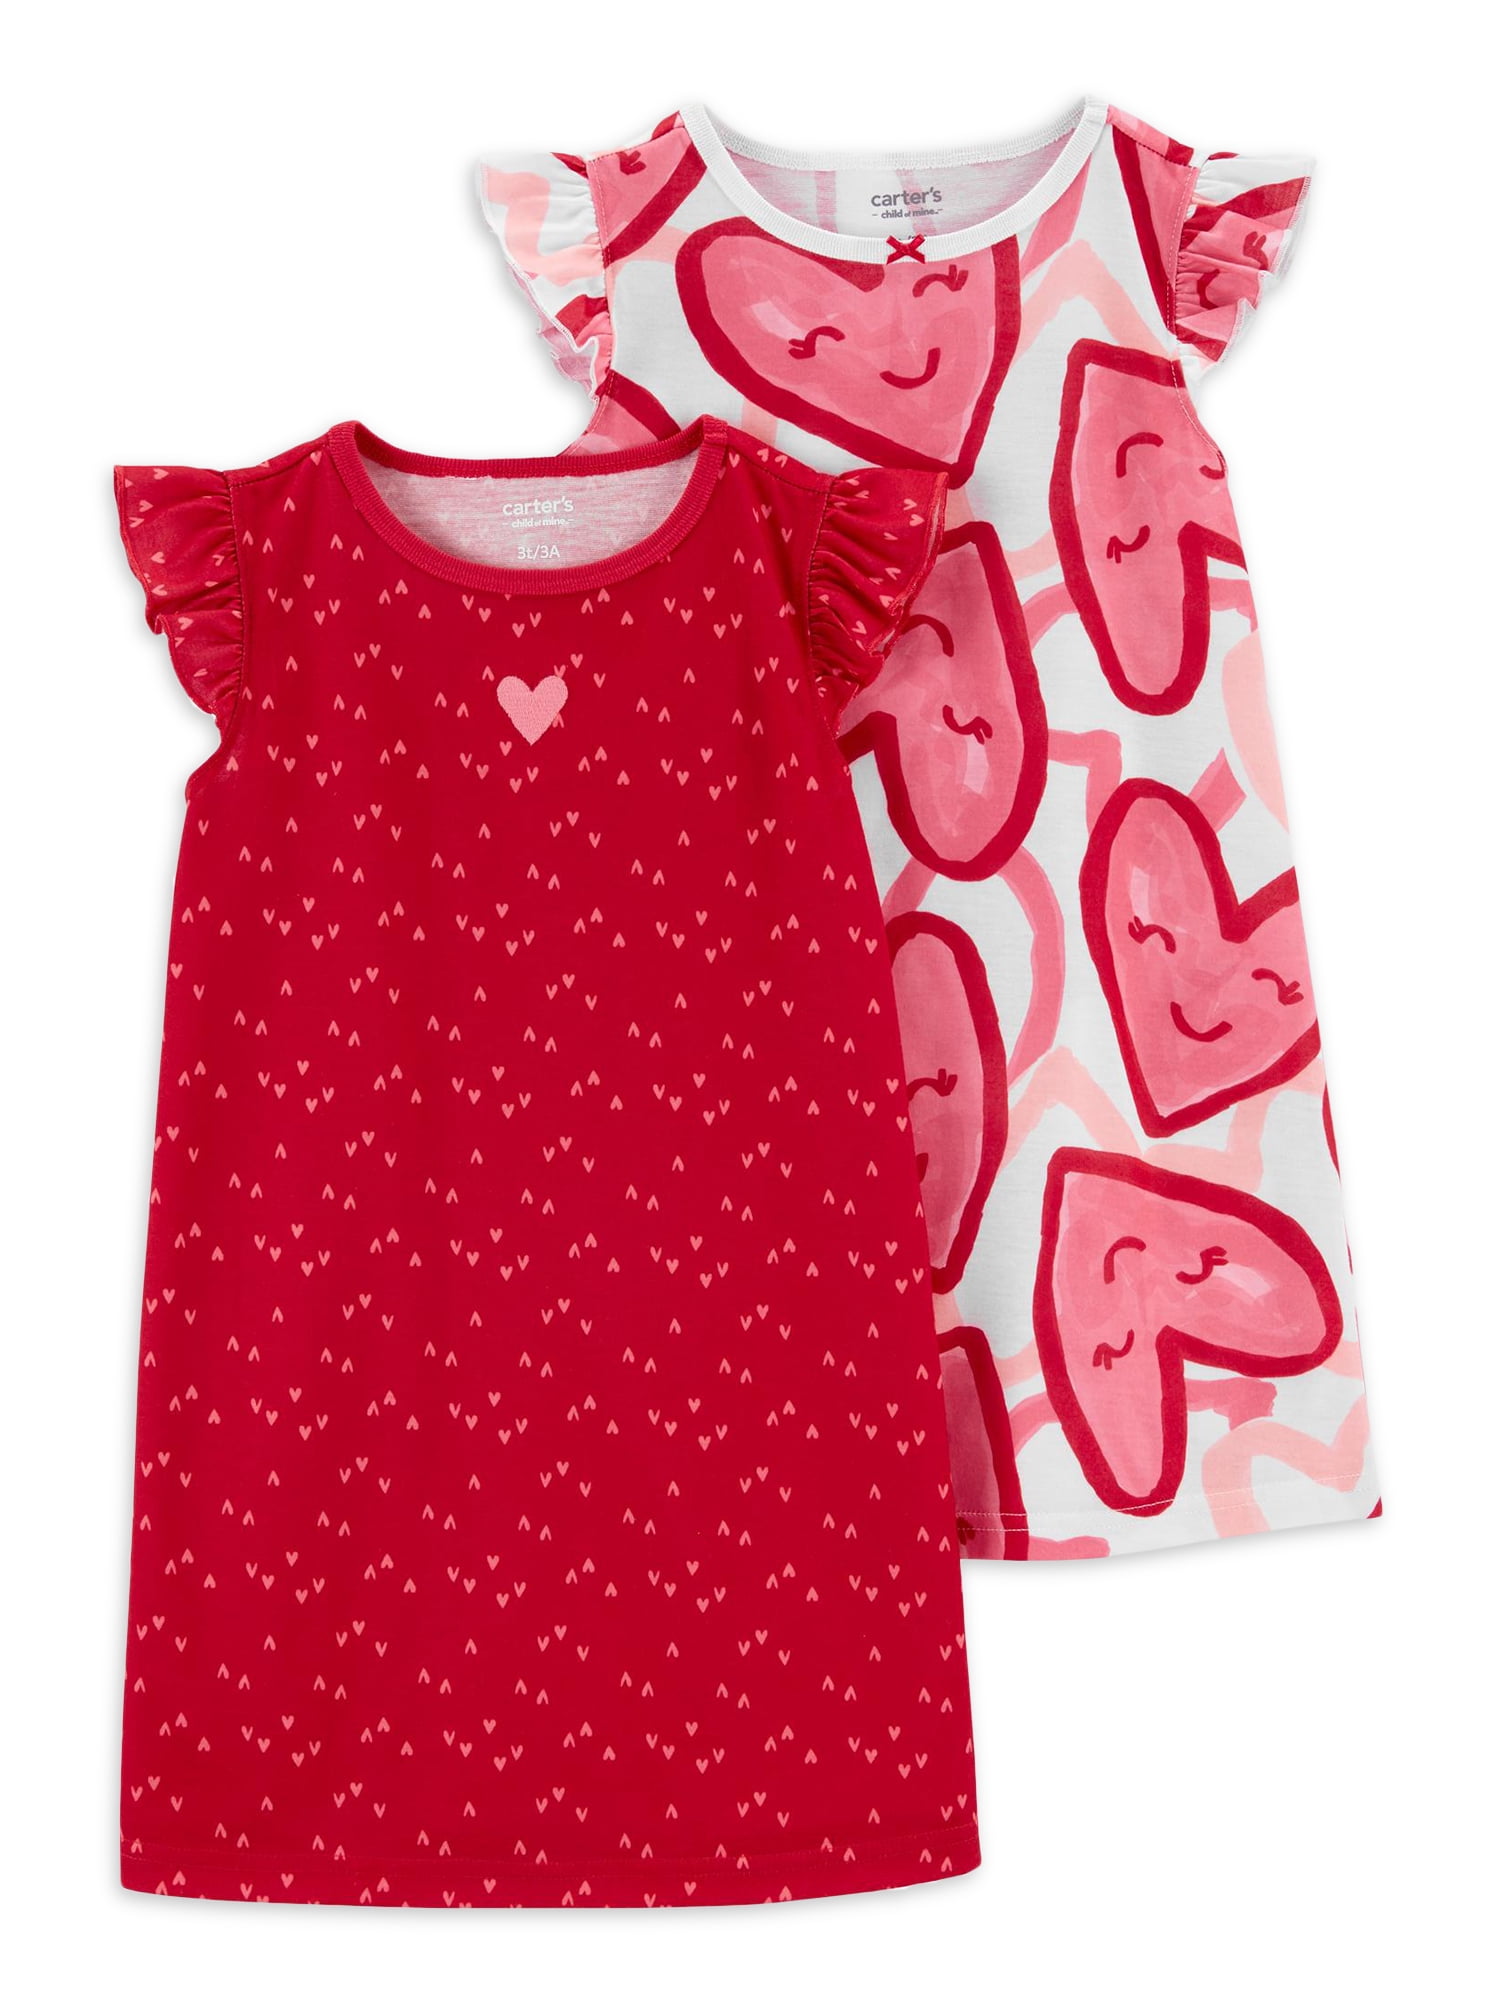 Carter's Child of Mine Toddler Girl Ruffled Hearts Nightgown, 2-Pack, Sizes 2T-5T